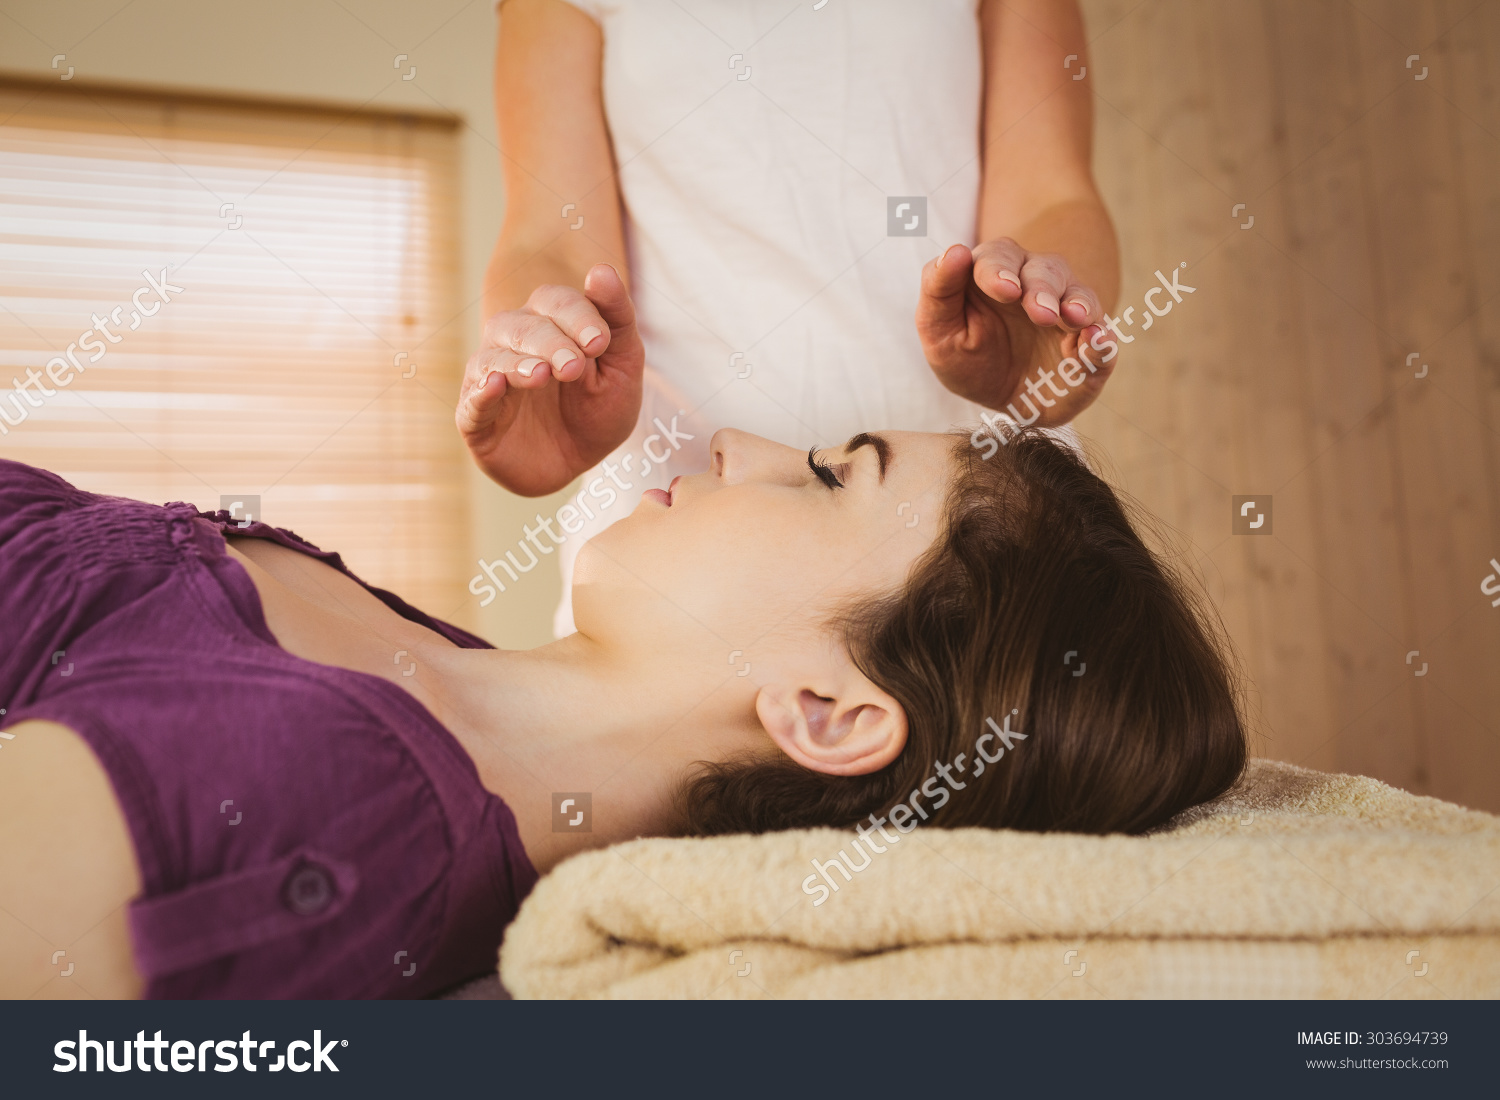 stock-photo-young-woman-having-a-reiki-treatment-in-therapy-room-303694739